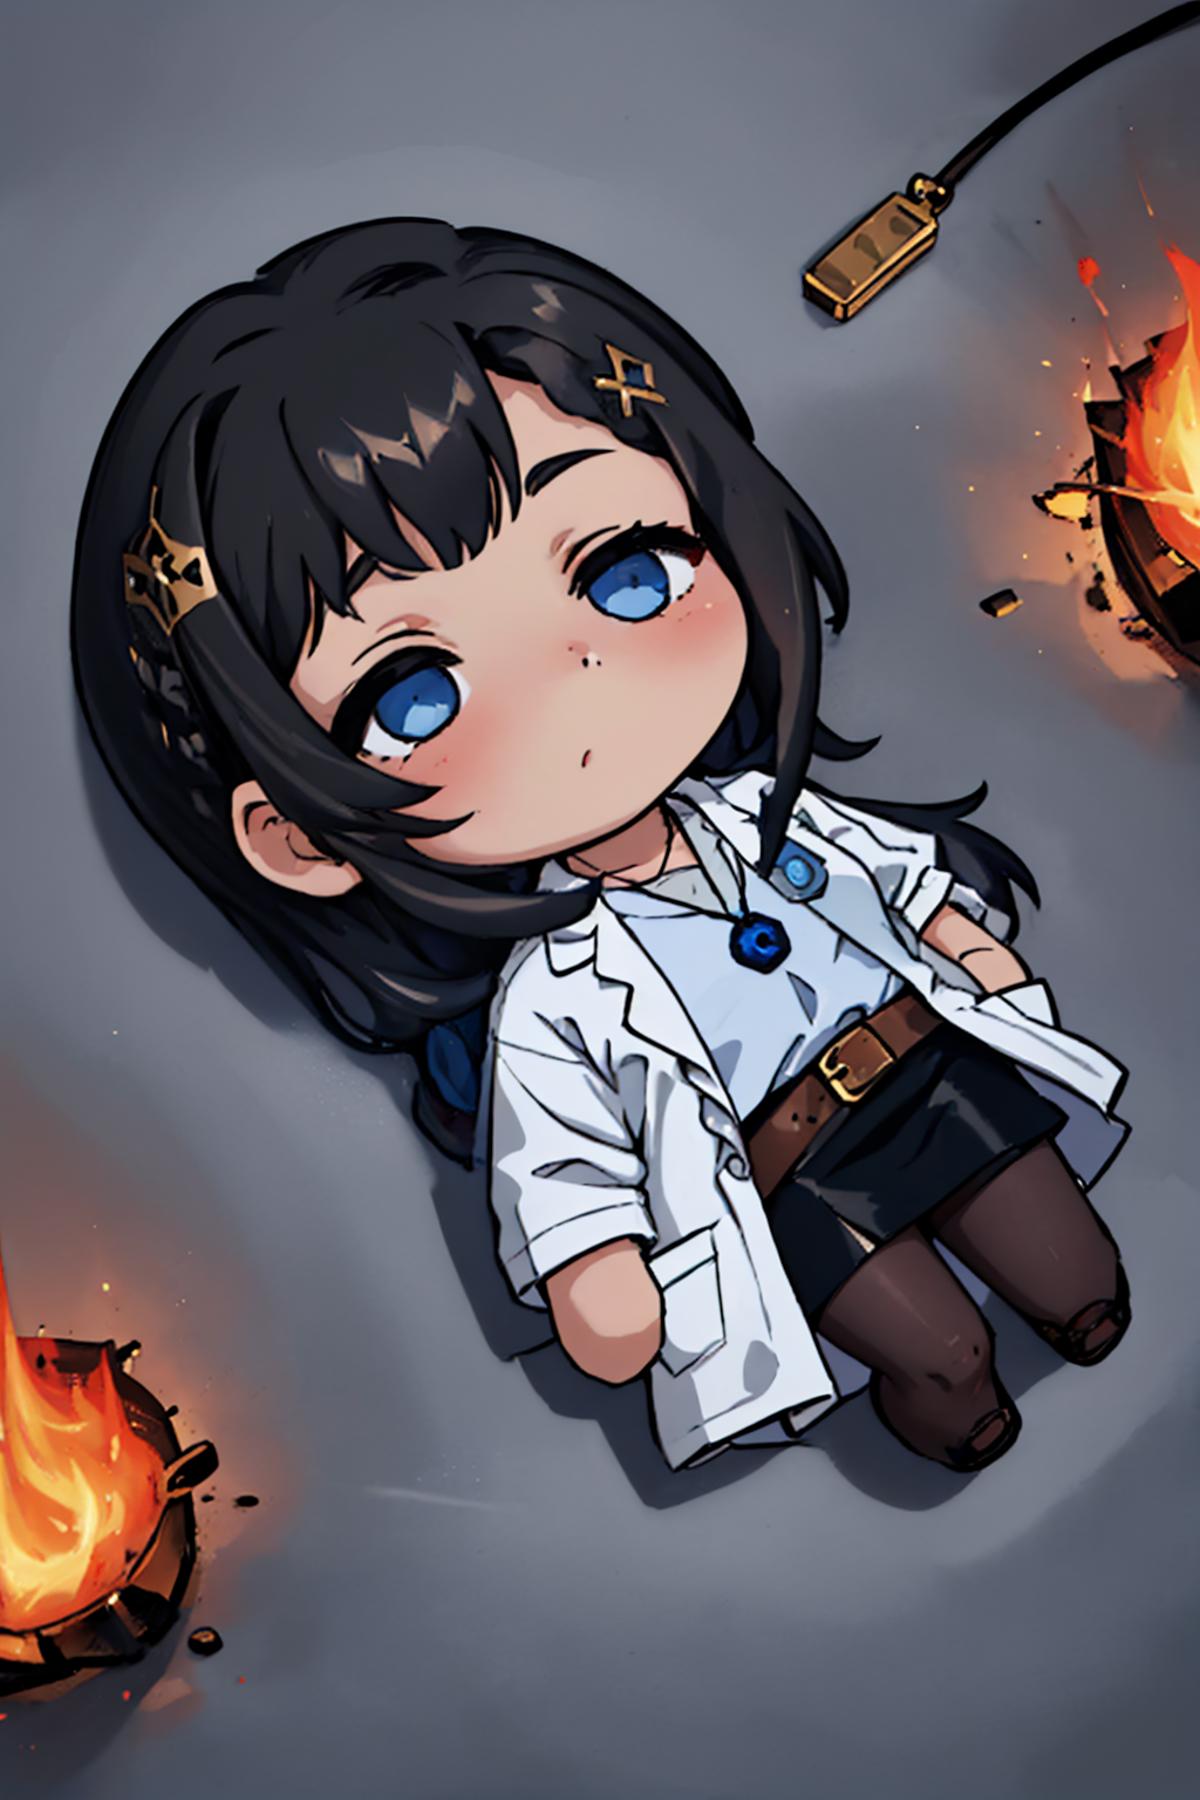 A cartoon illustration of a girl wearing a white lab coat, blue eyes, and a brown belt.